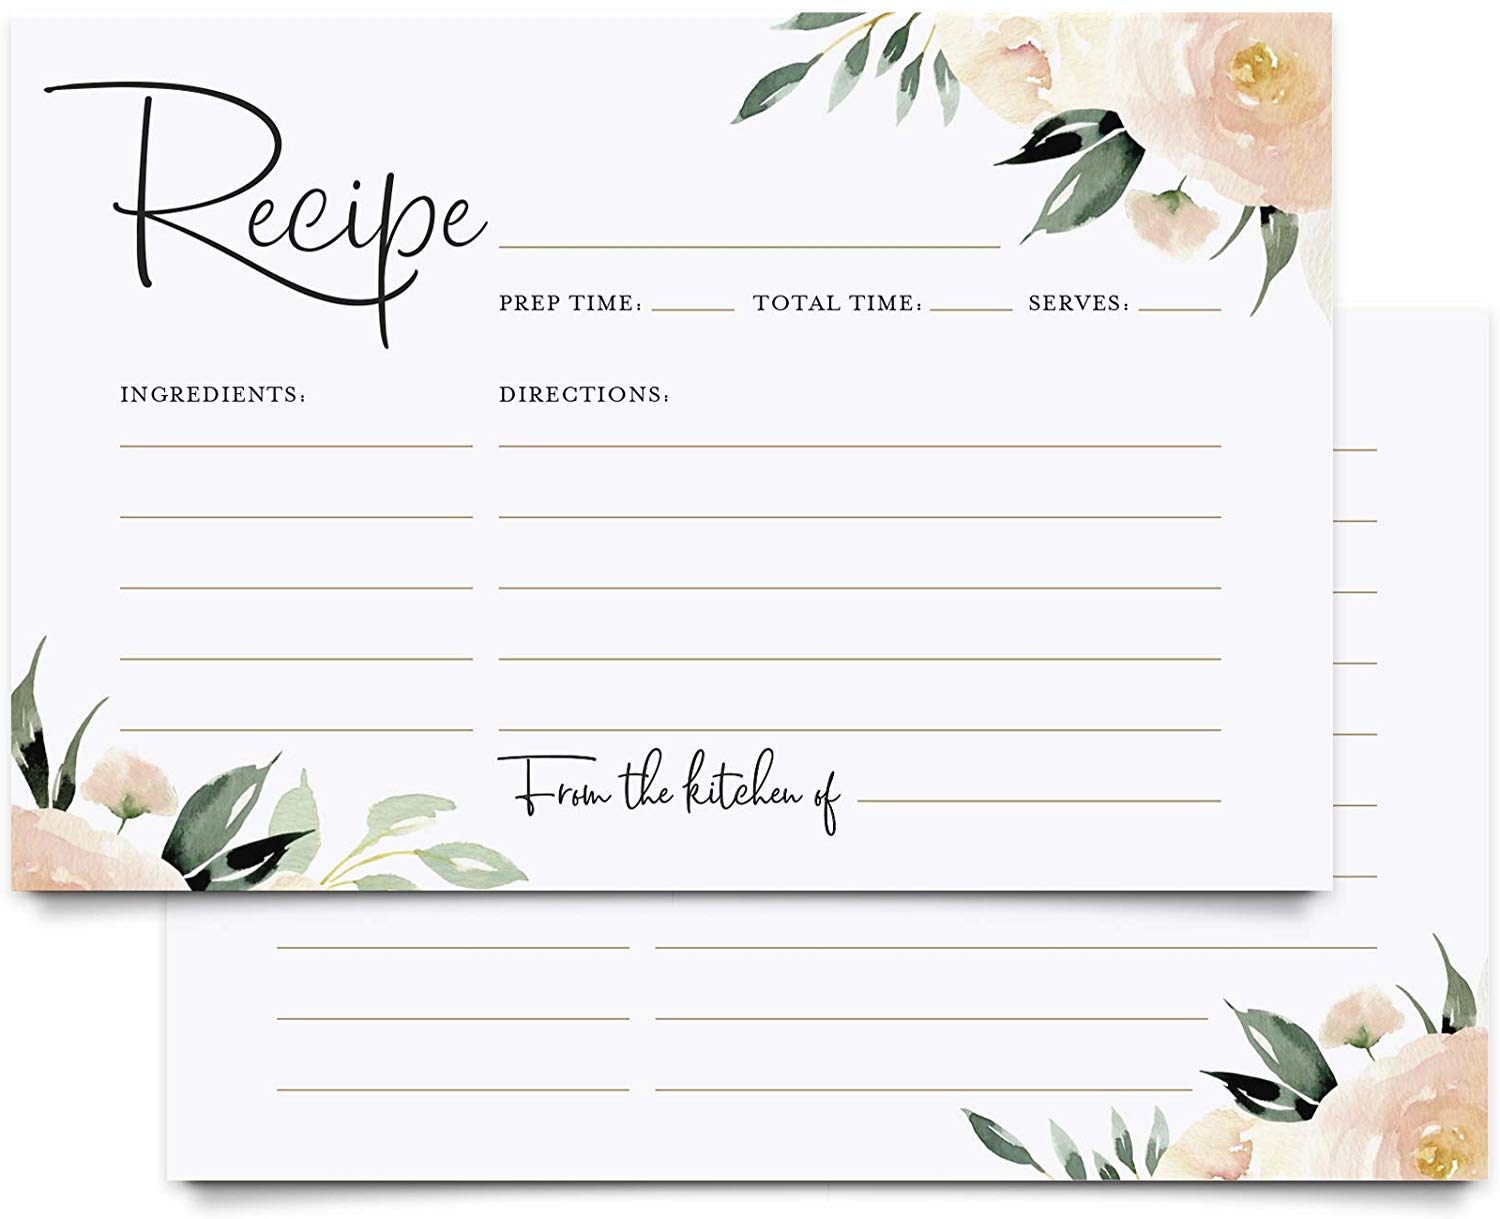 Bliss Collections Floral Recipe Cards, Double Sided, Coral and Greenery Flower Design for Bridal Shower, Wedding Shower, Housewarming Gift! Pack of 50 4x6 Cards